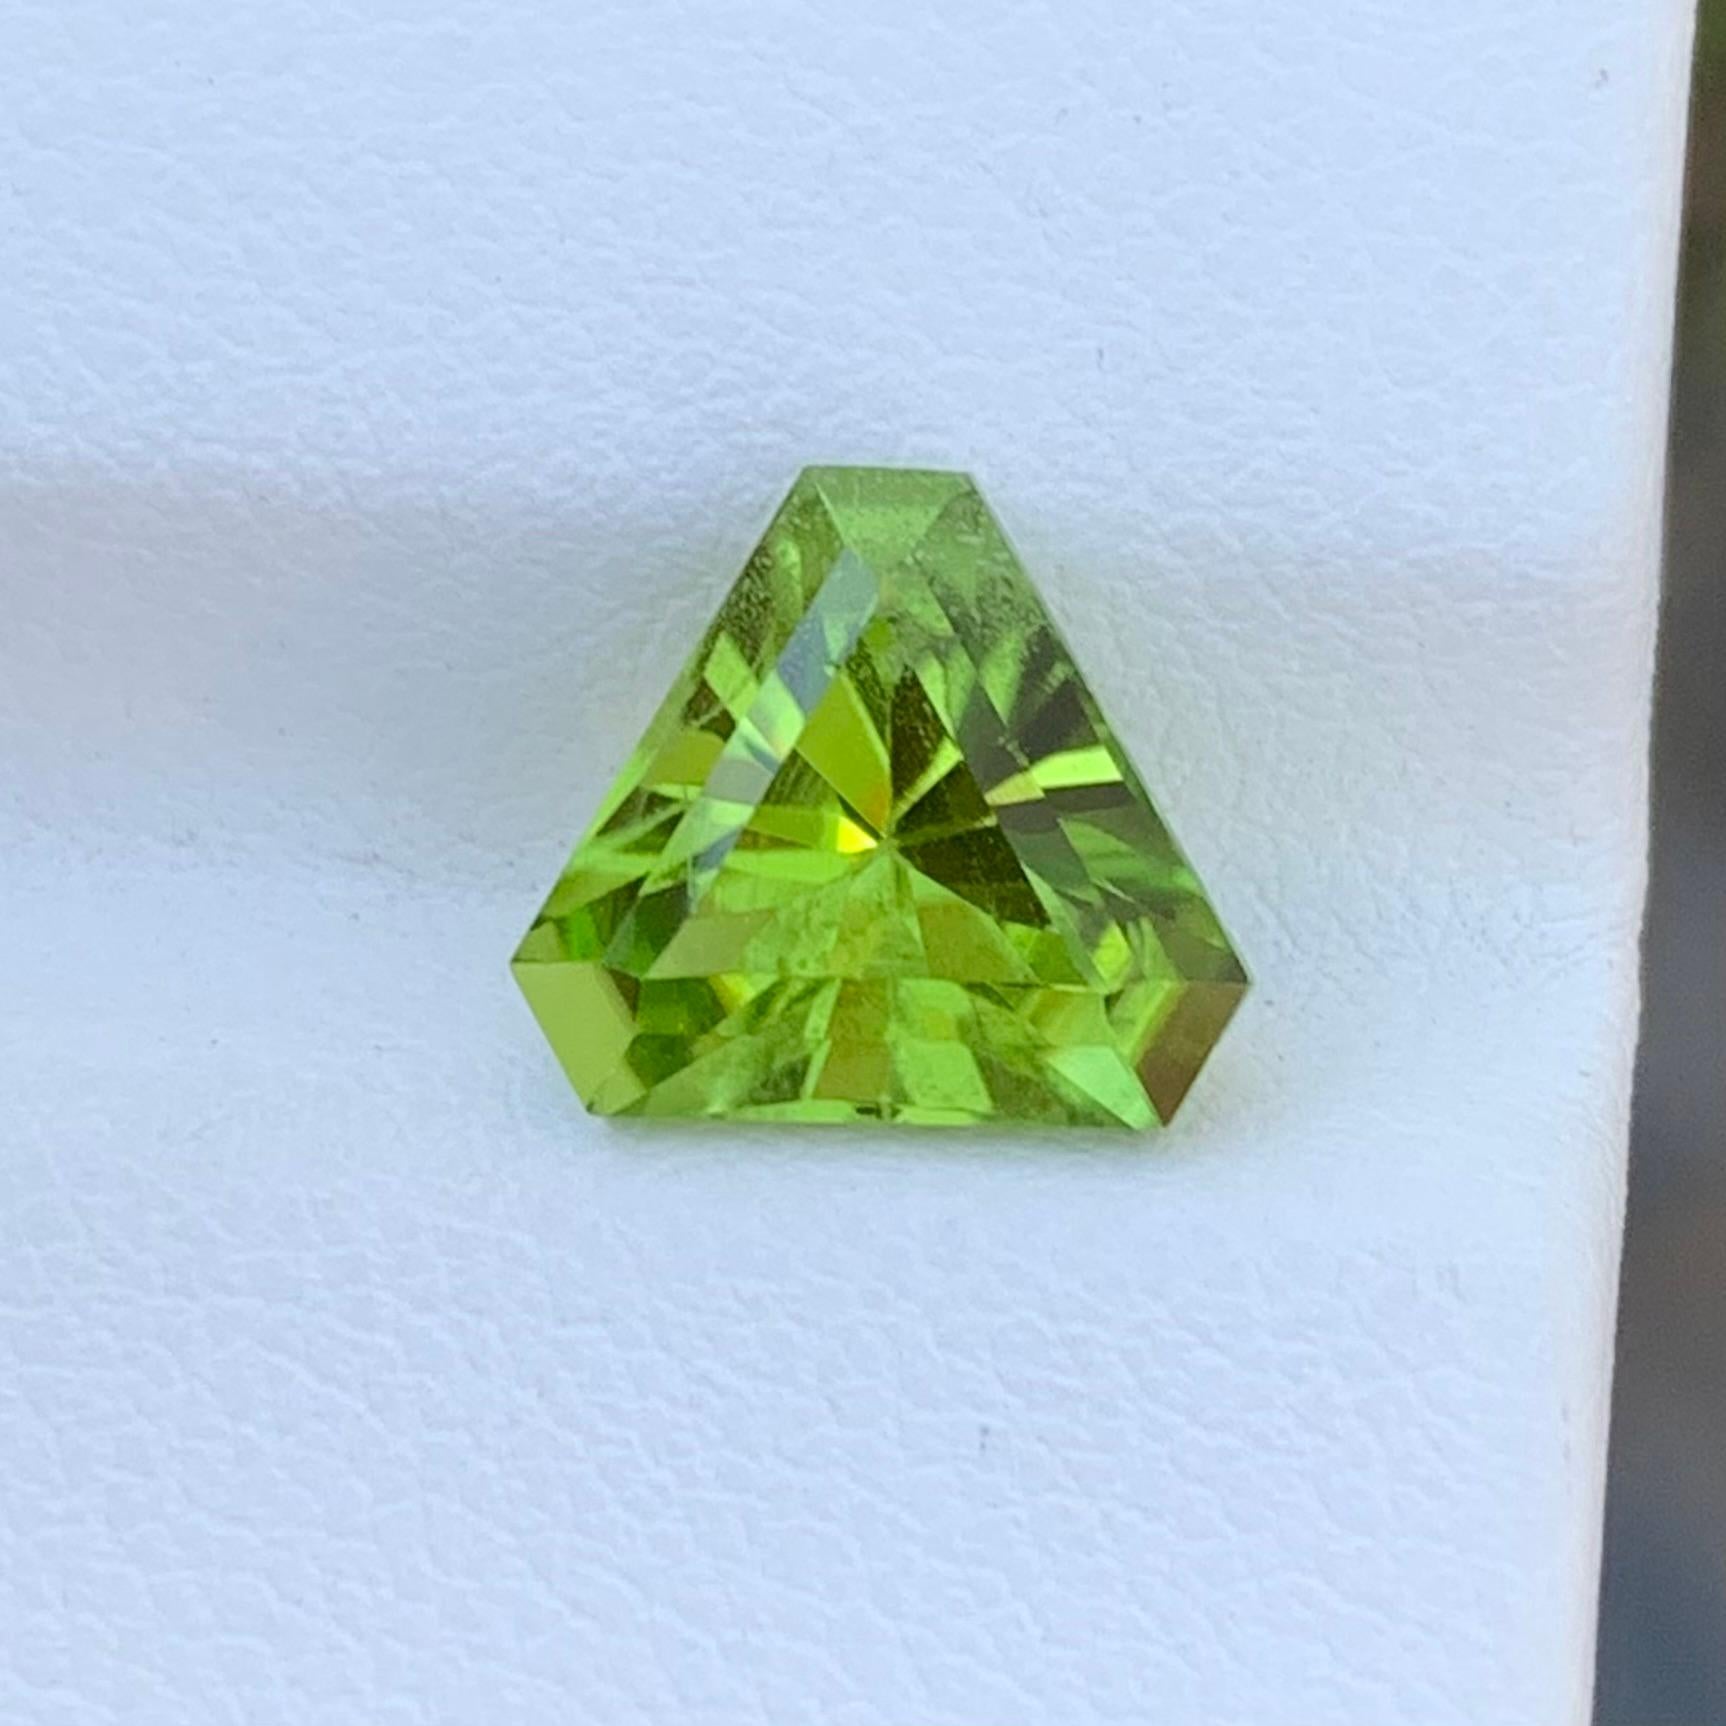 Loose Peridot 
Weight: 2.70 Carats 
Dimension: 8.4 x 8.4 x 5.6 Mm
Origin: Supat Valley, Pakistan 
Colour: Green 
Shape: Trillion
Treatment: Non 
Certificate: On Demand 

Peridot, a gemstone that radiates a vibrant green hue, is renowned for its